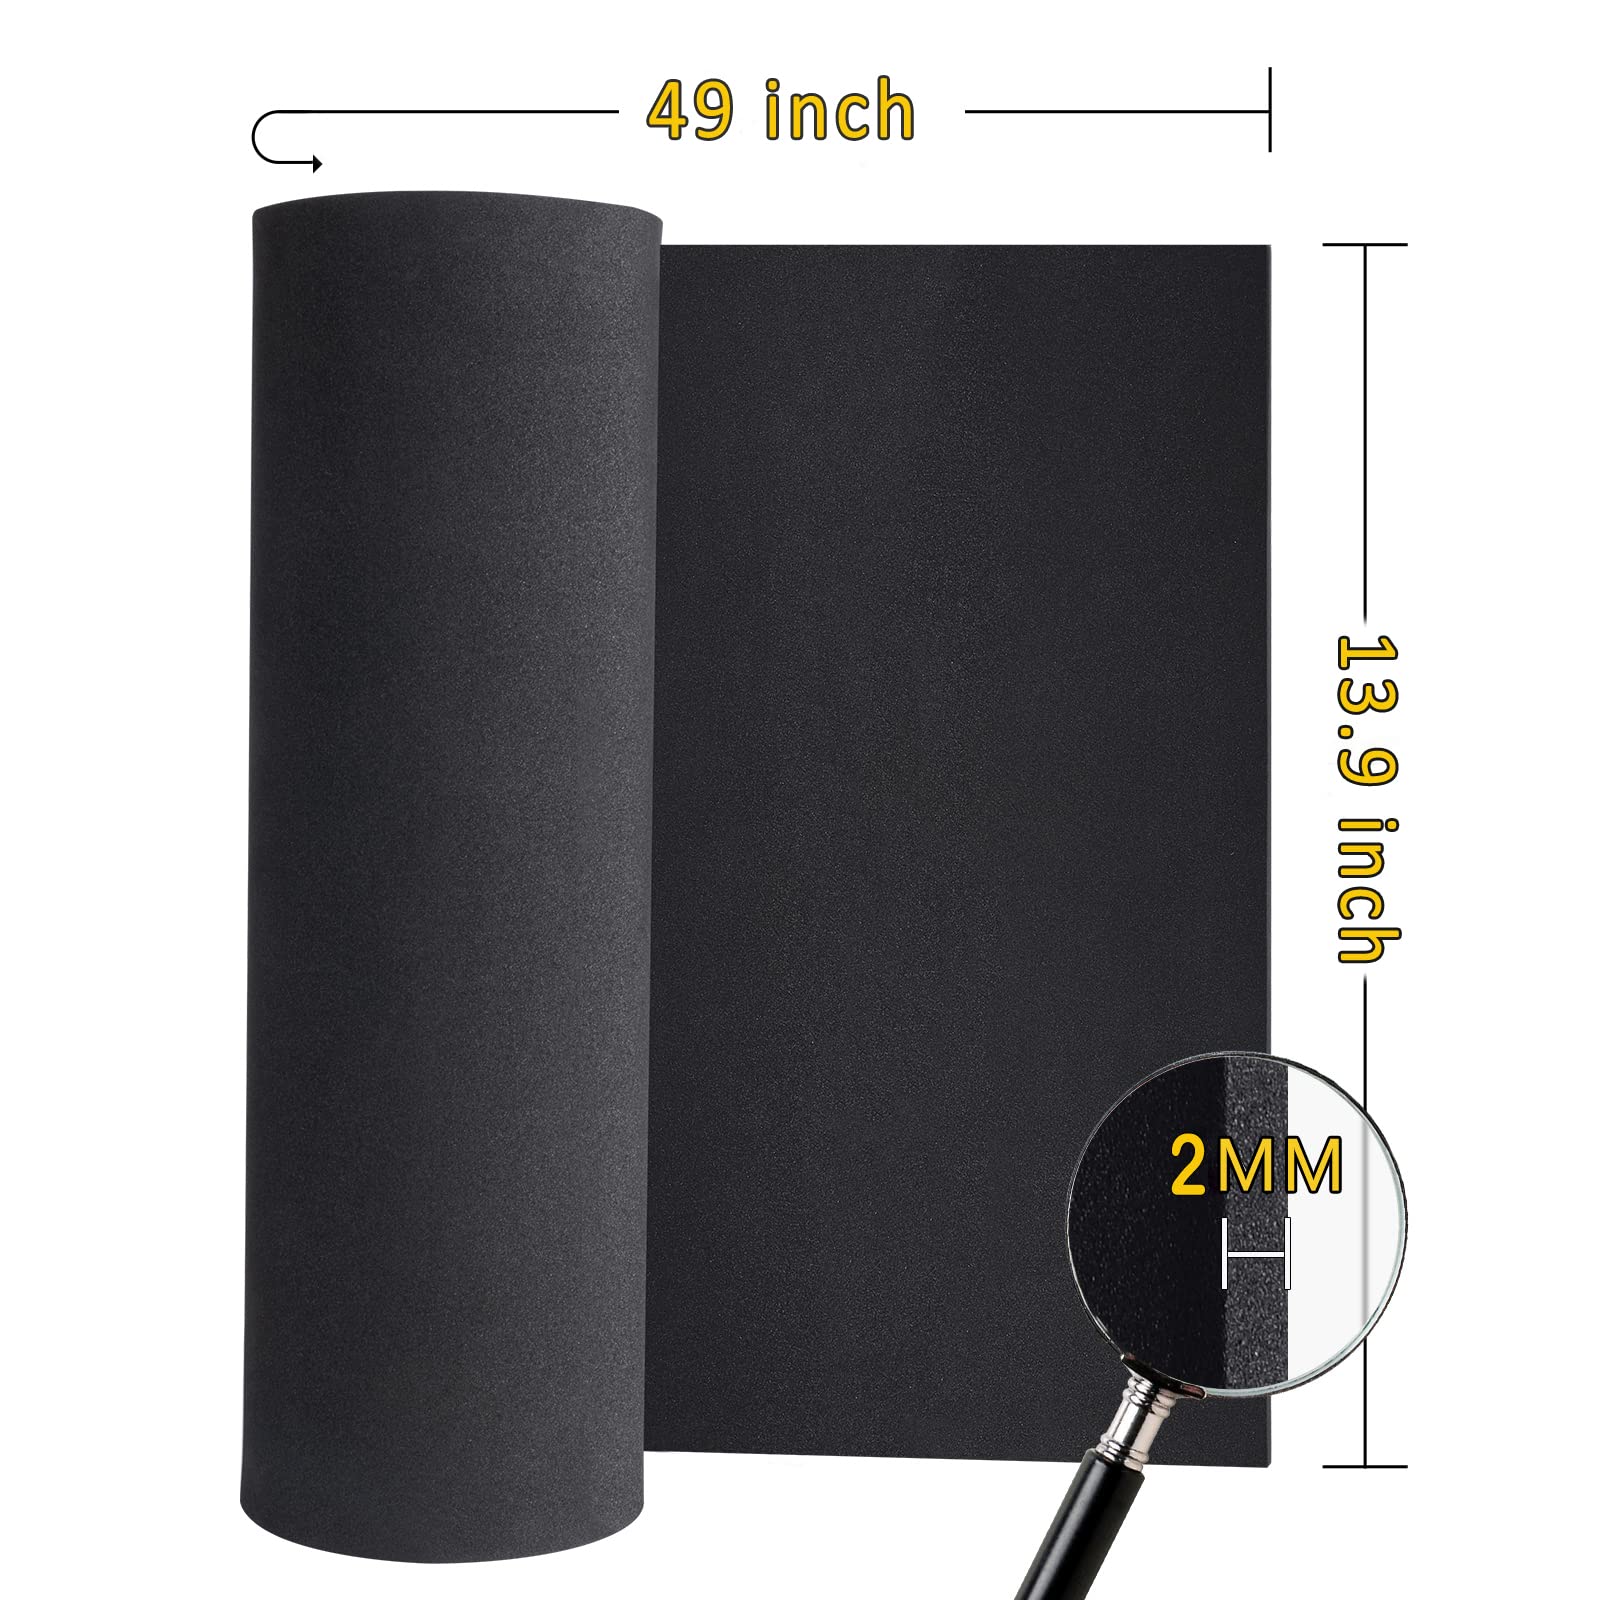 Black eva Foam roll, (1mm to 10mm) Premium Cosplay EVA Foam Sheet,2mm Thick,49"x13.5",High Density 86kg/m3 for Cosplay Costume, Crafts, DIY Projects by PAIDU